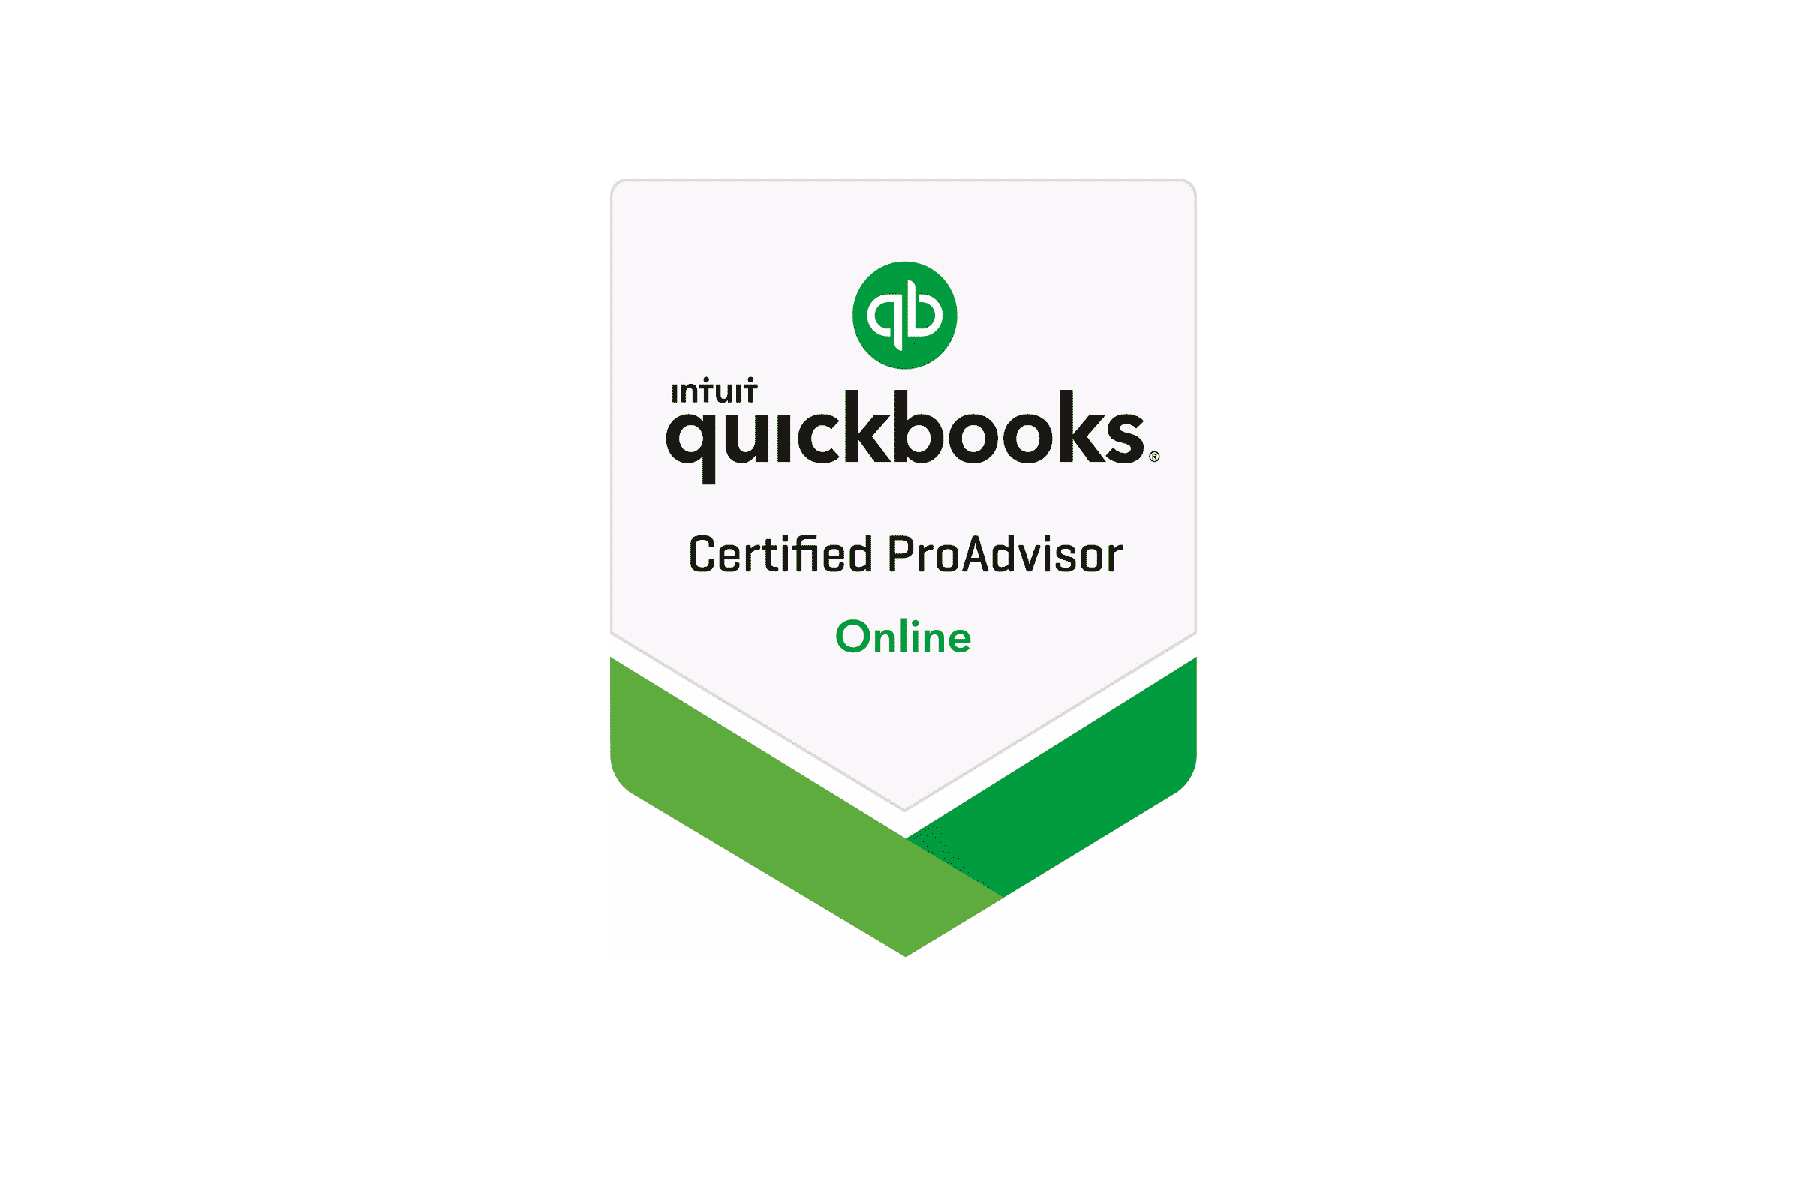 How much does it cost to become a quickbooks proadvisor Our Head Office Is Now A Quickbooks Certified Proadvisor Our Head Office